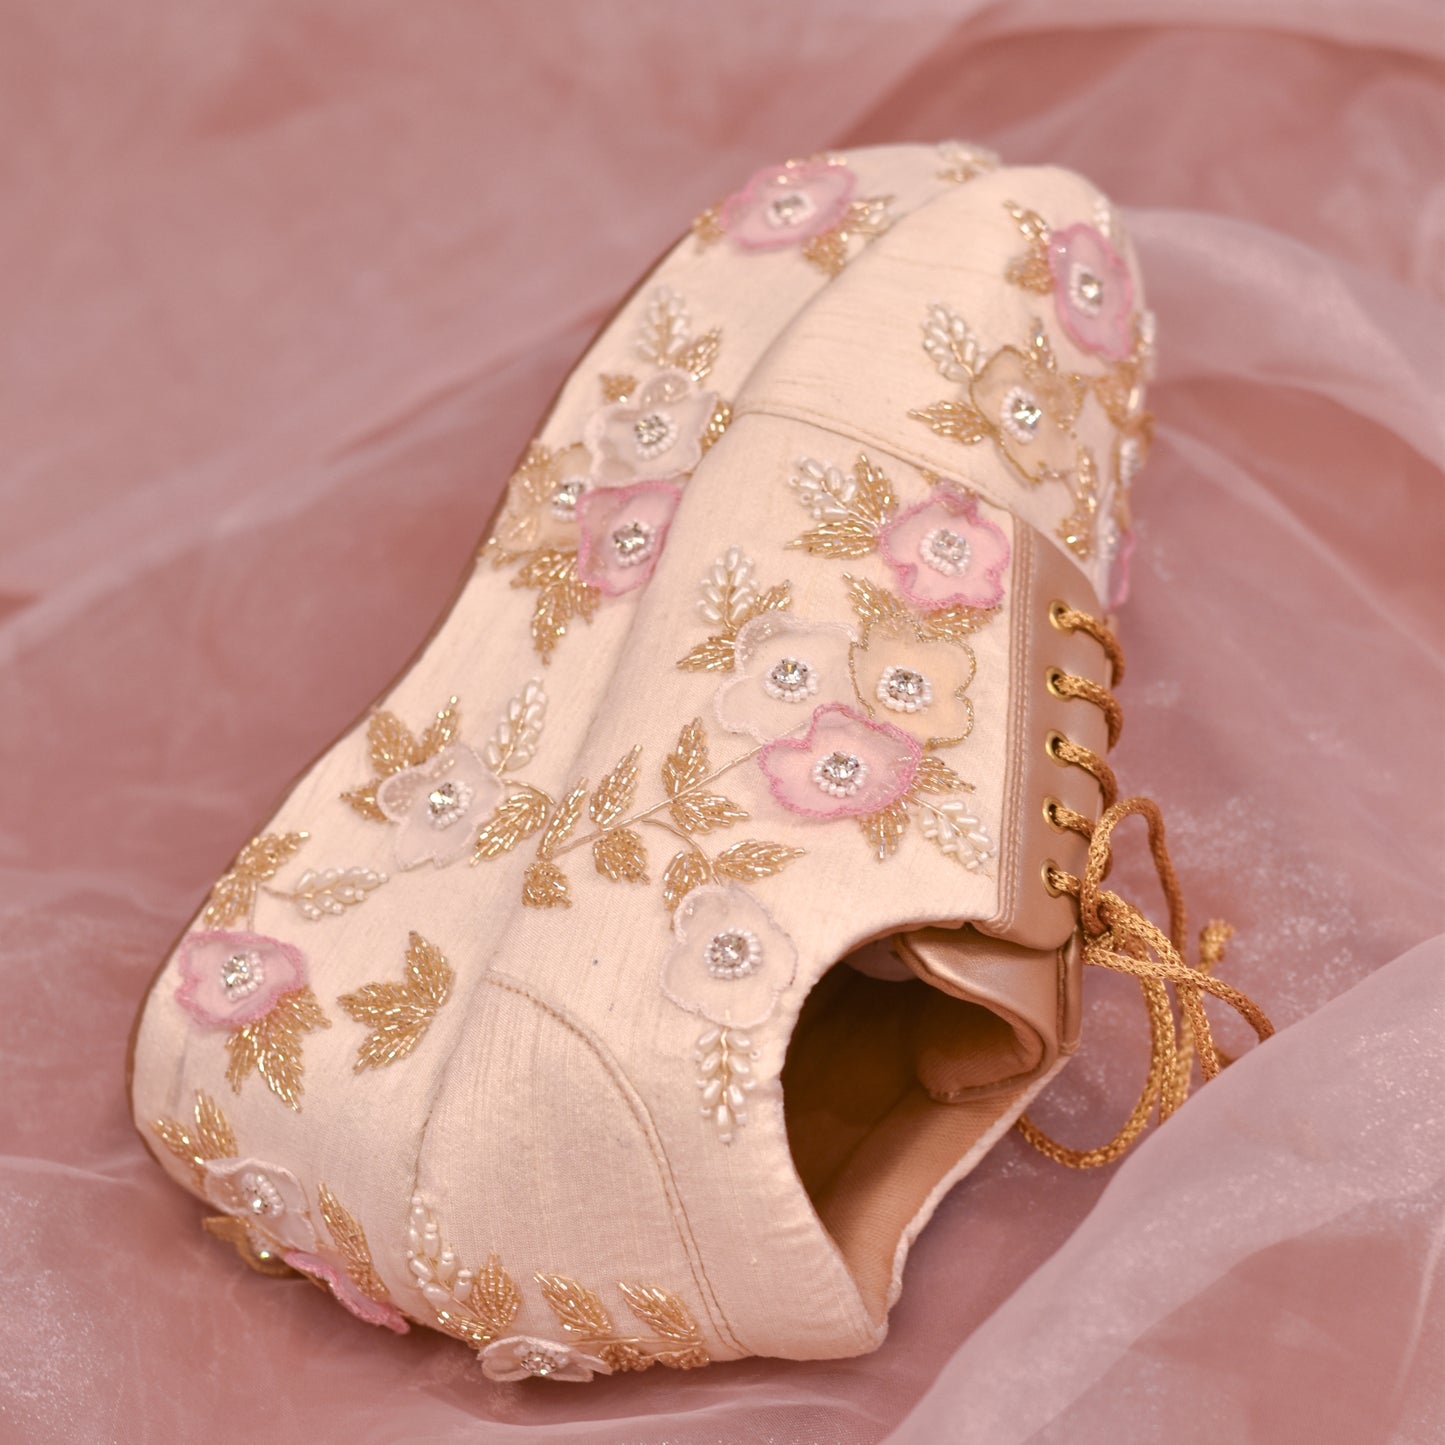 Cream sneaker wedges with embroidery